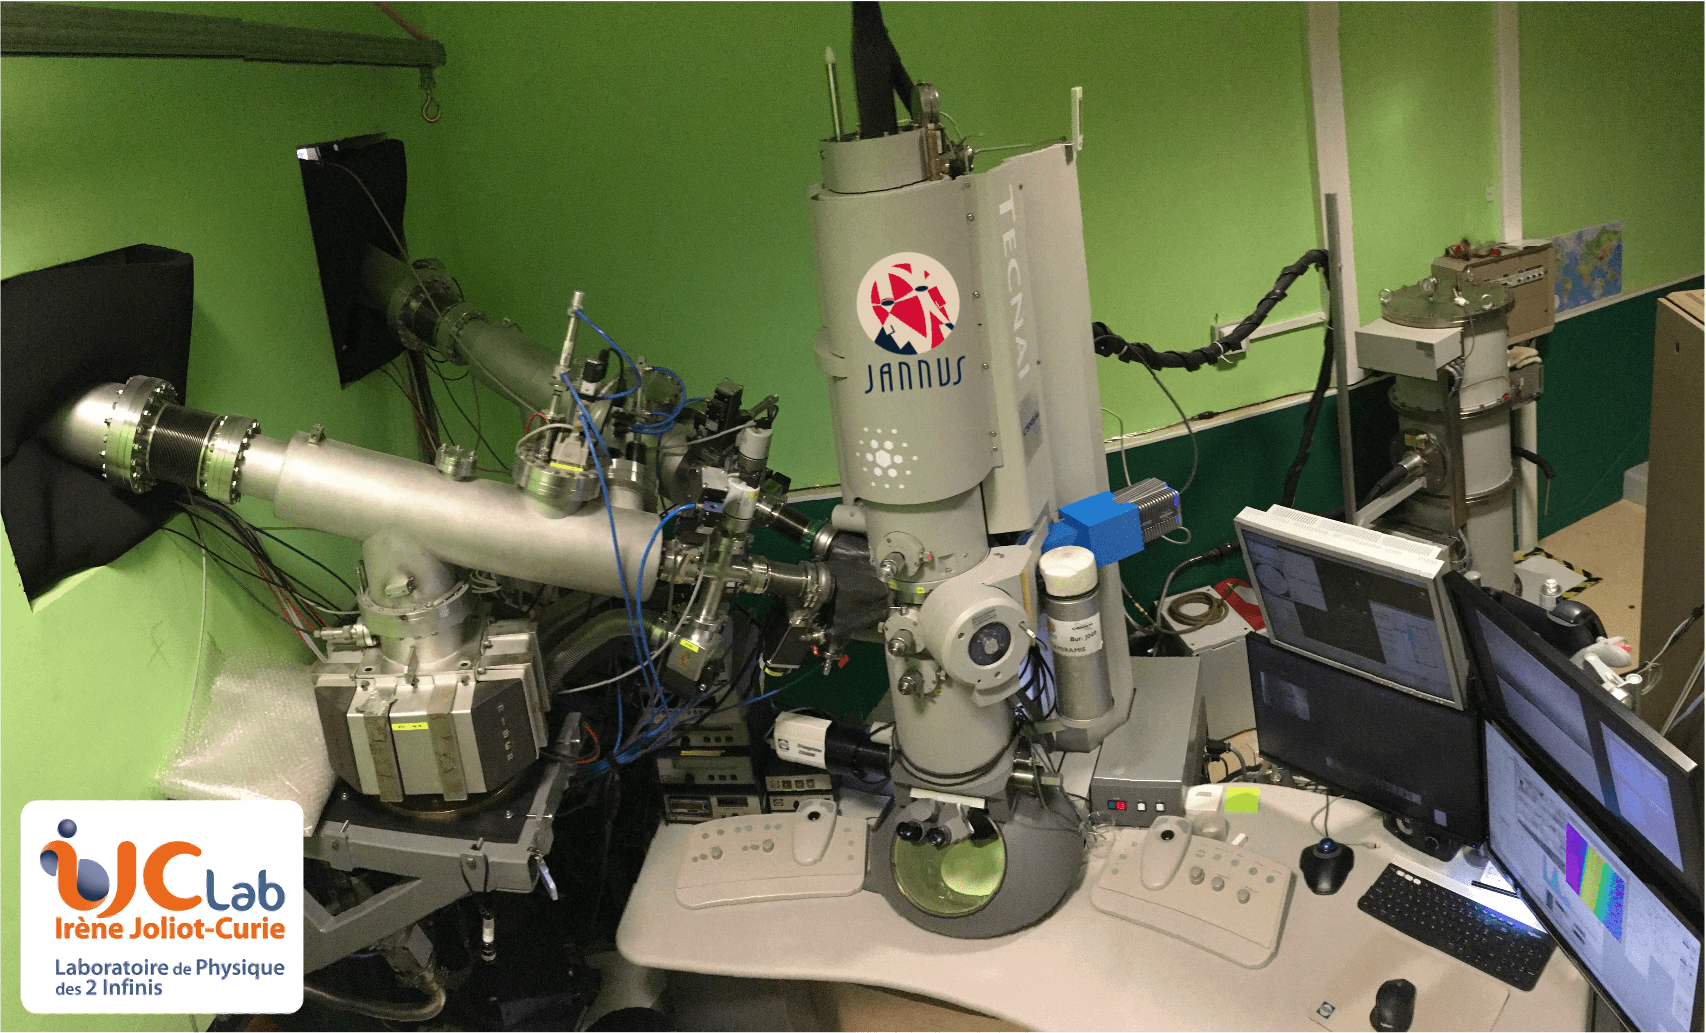 Overview of the Transmission Electron Microscope with its two ion beam connections seen on the left (© C. Baumier)